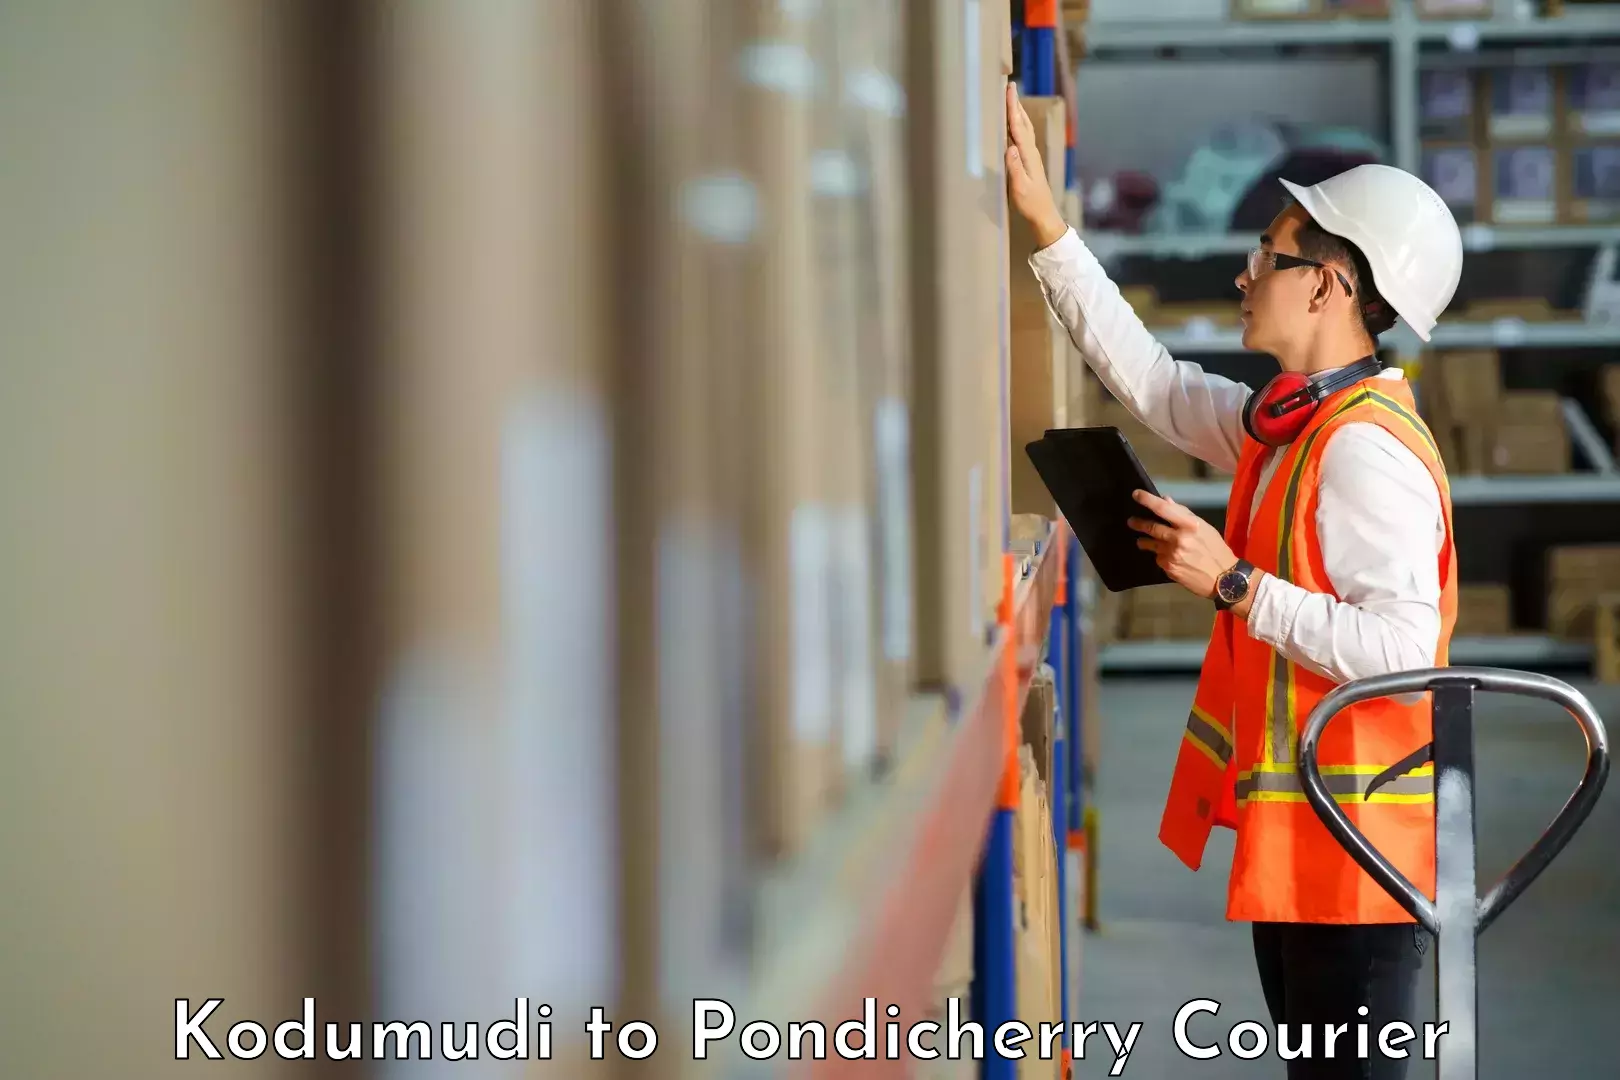 High-quality delivery services in Kodumudi to Pondicherry